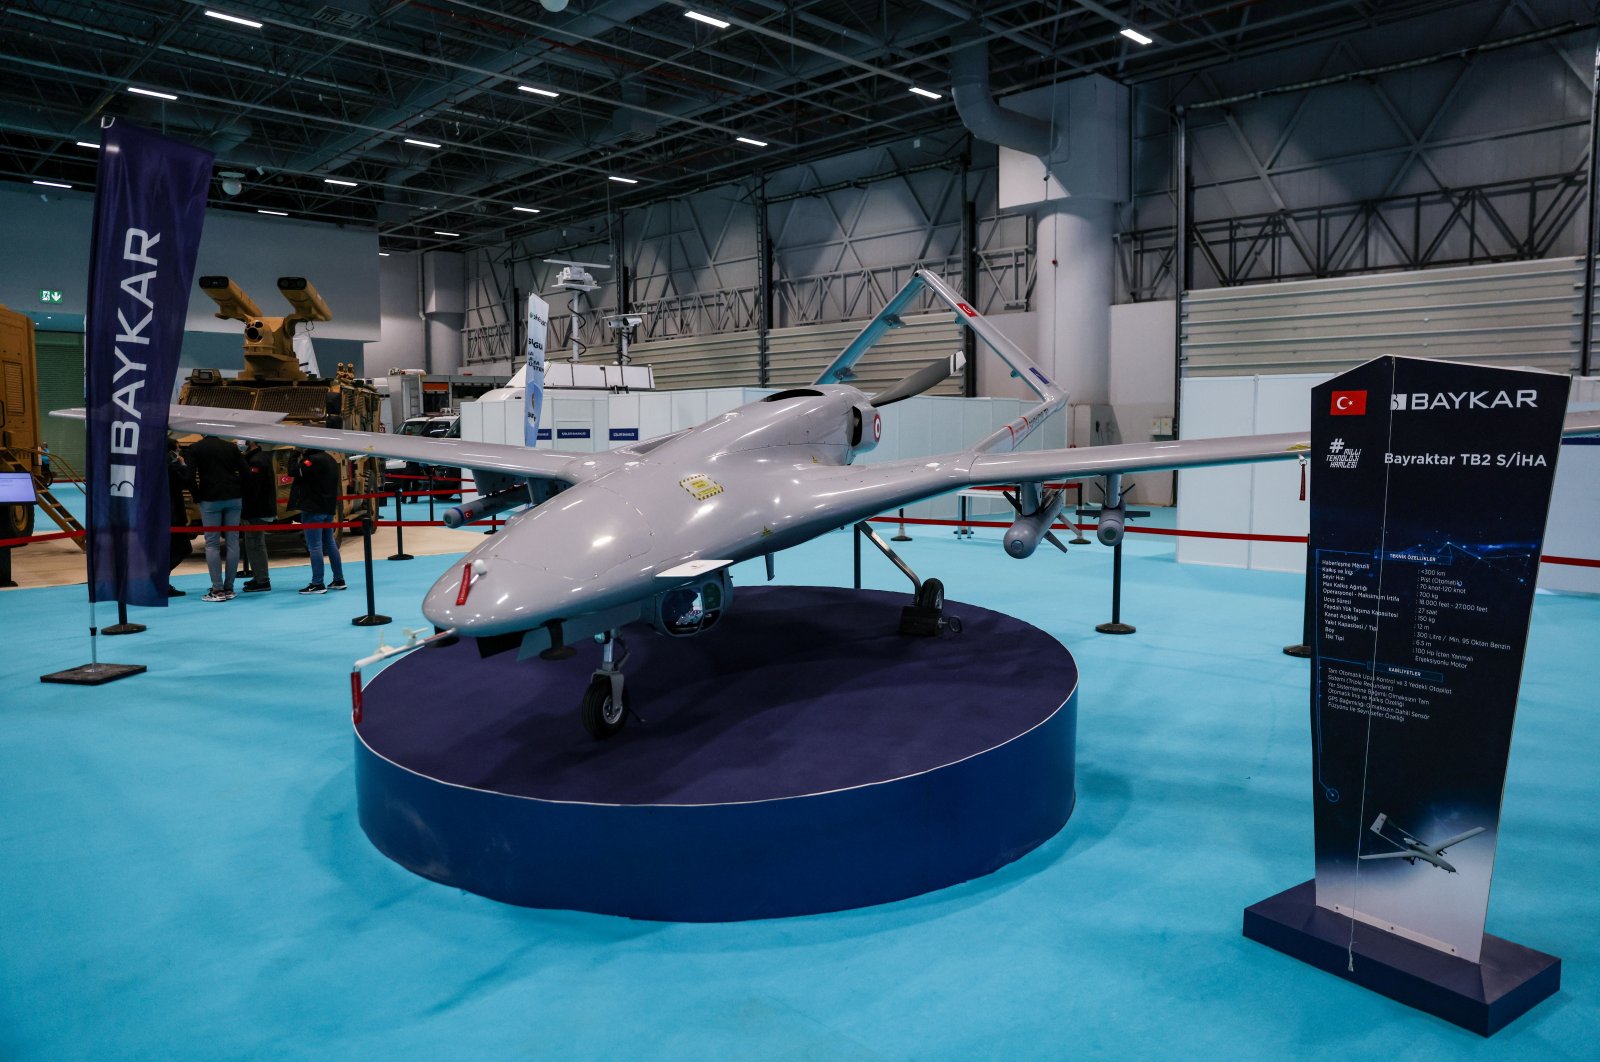 TB2 drone of Turkish drone-maker Baykar is seen at a stand during the first day of SAHA EXPO Defence & Aerospace Exhibition in Istanbul, Turkey, November 10, 2021. REUTERS/Umit Bektas